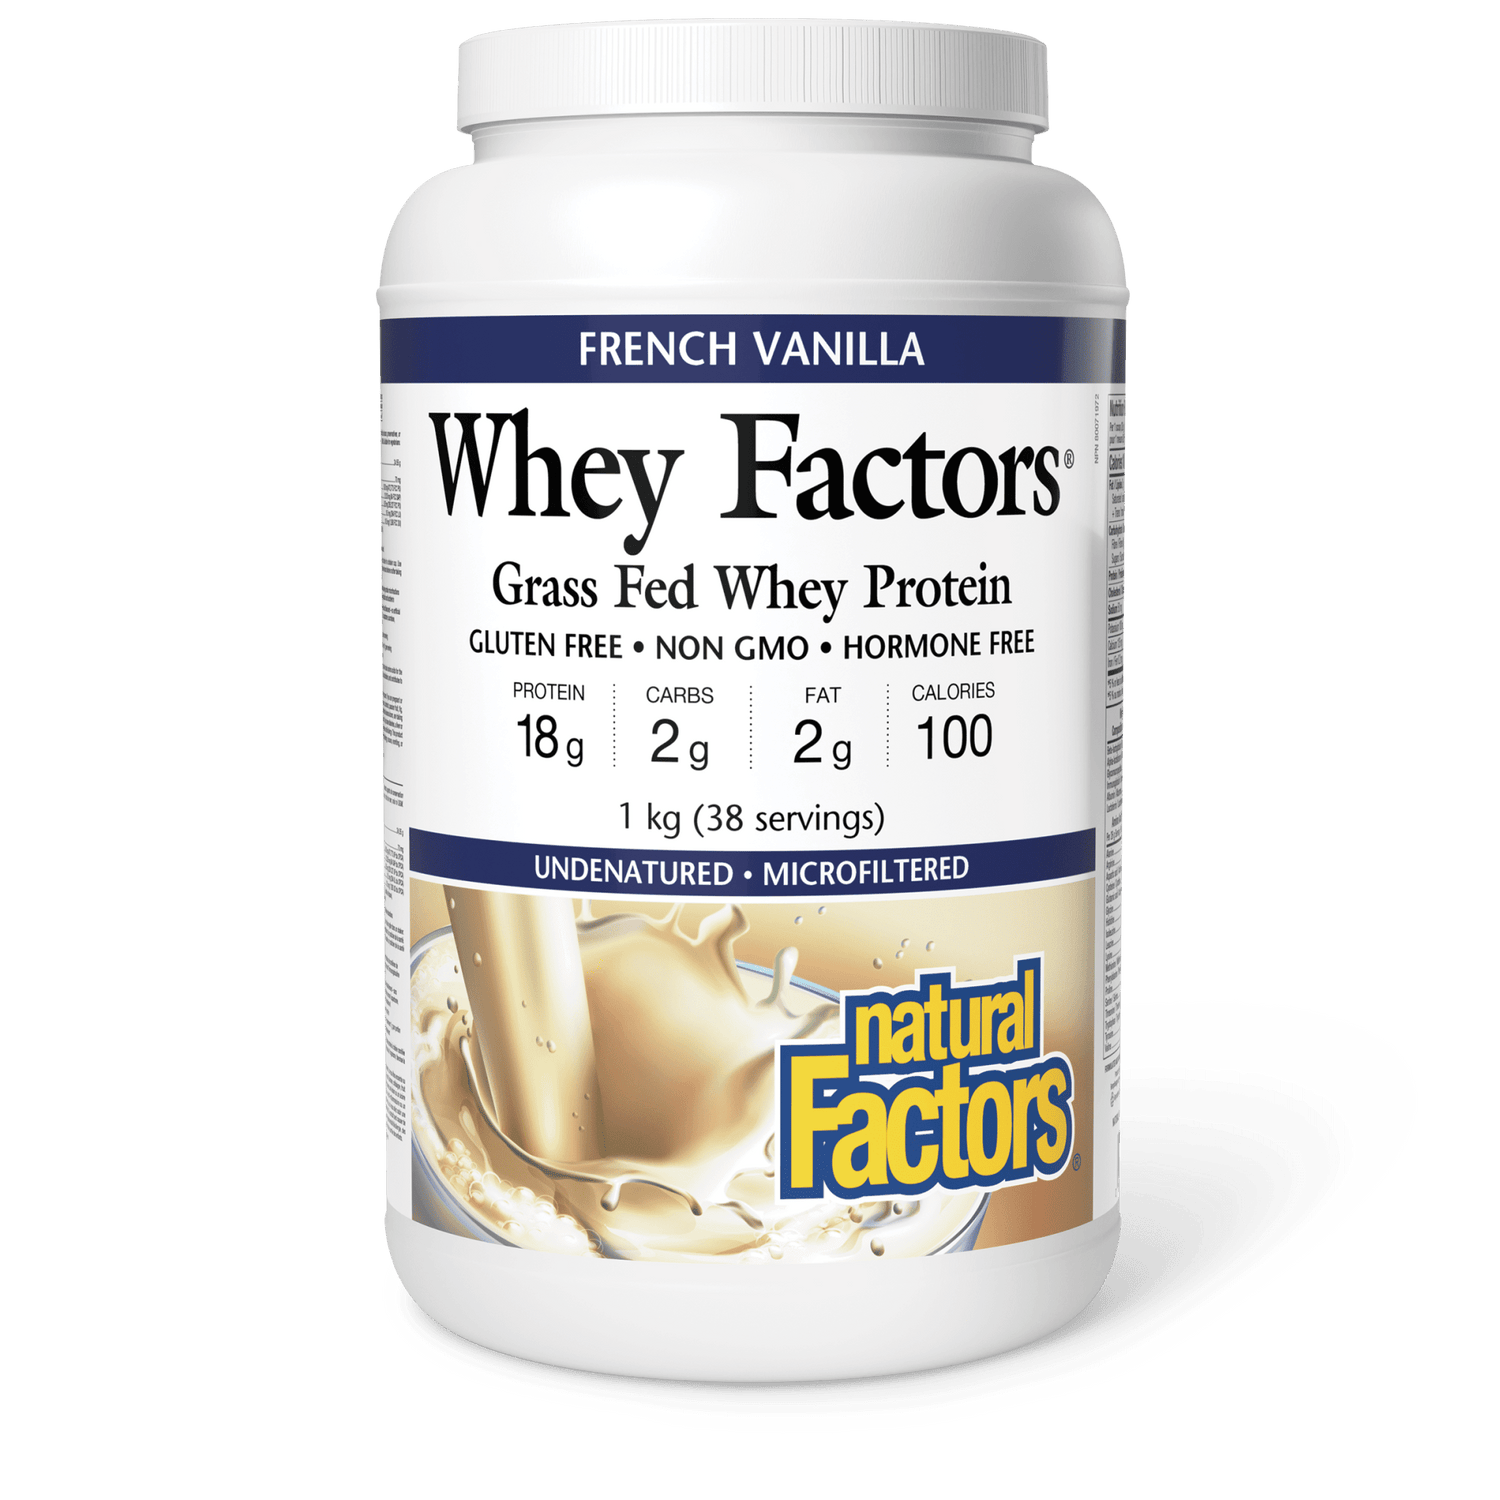 Whey Factors Grass Fed Whey Protein, French Vanilla, Natural Factors|v|image|2926